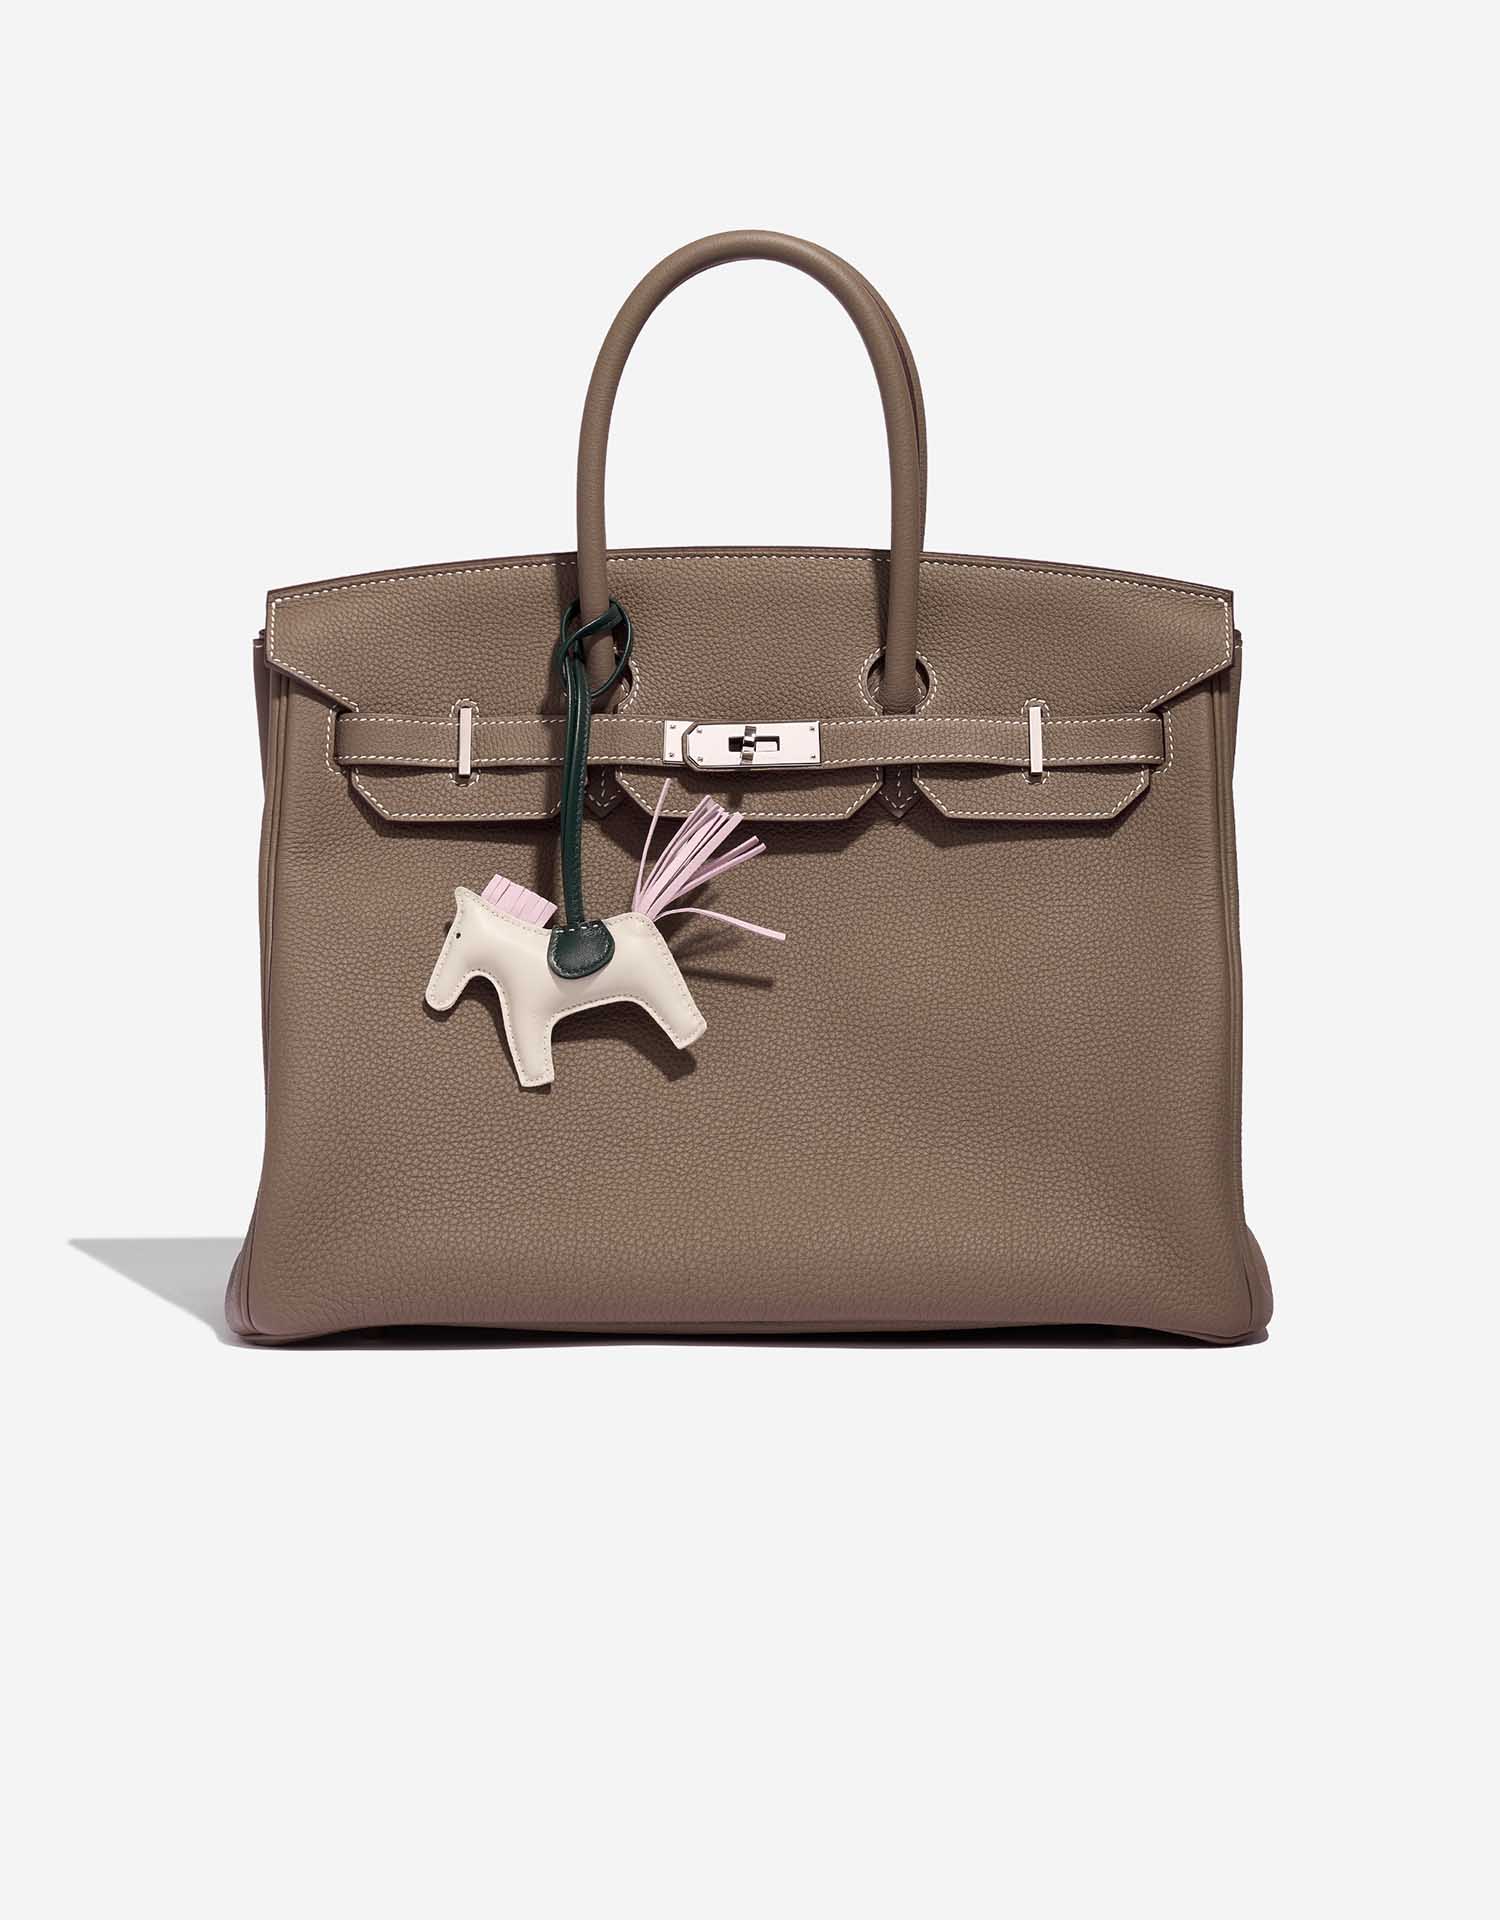 Hermes Rodeo PM Bag Charm Craie / Vert Cypress / Mauve Pale – Mightychic